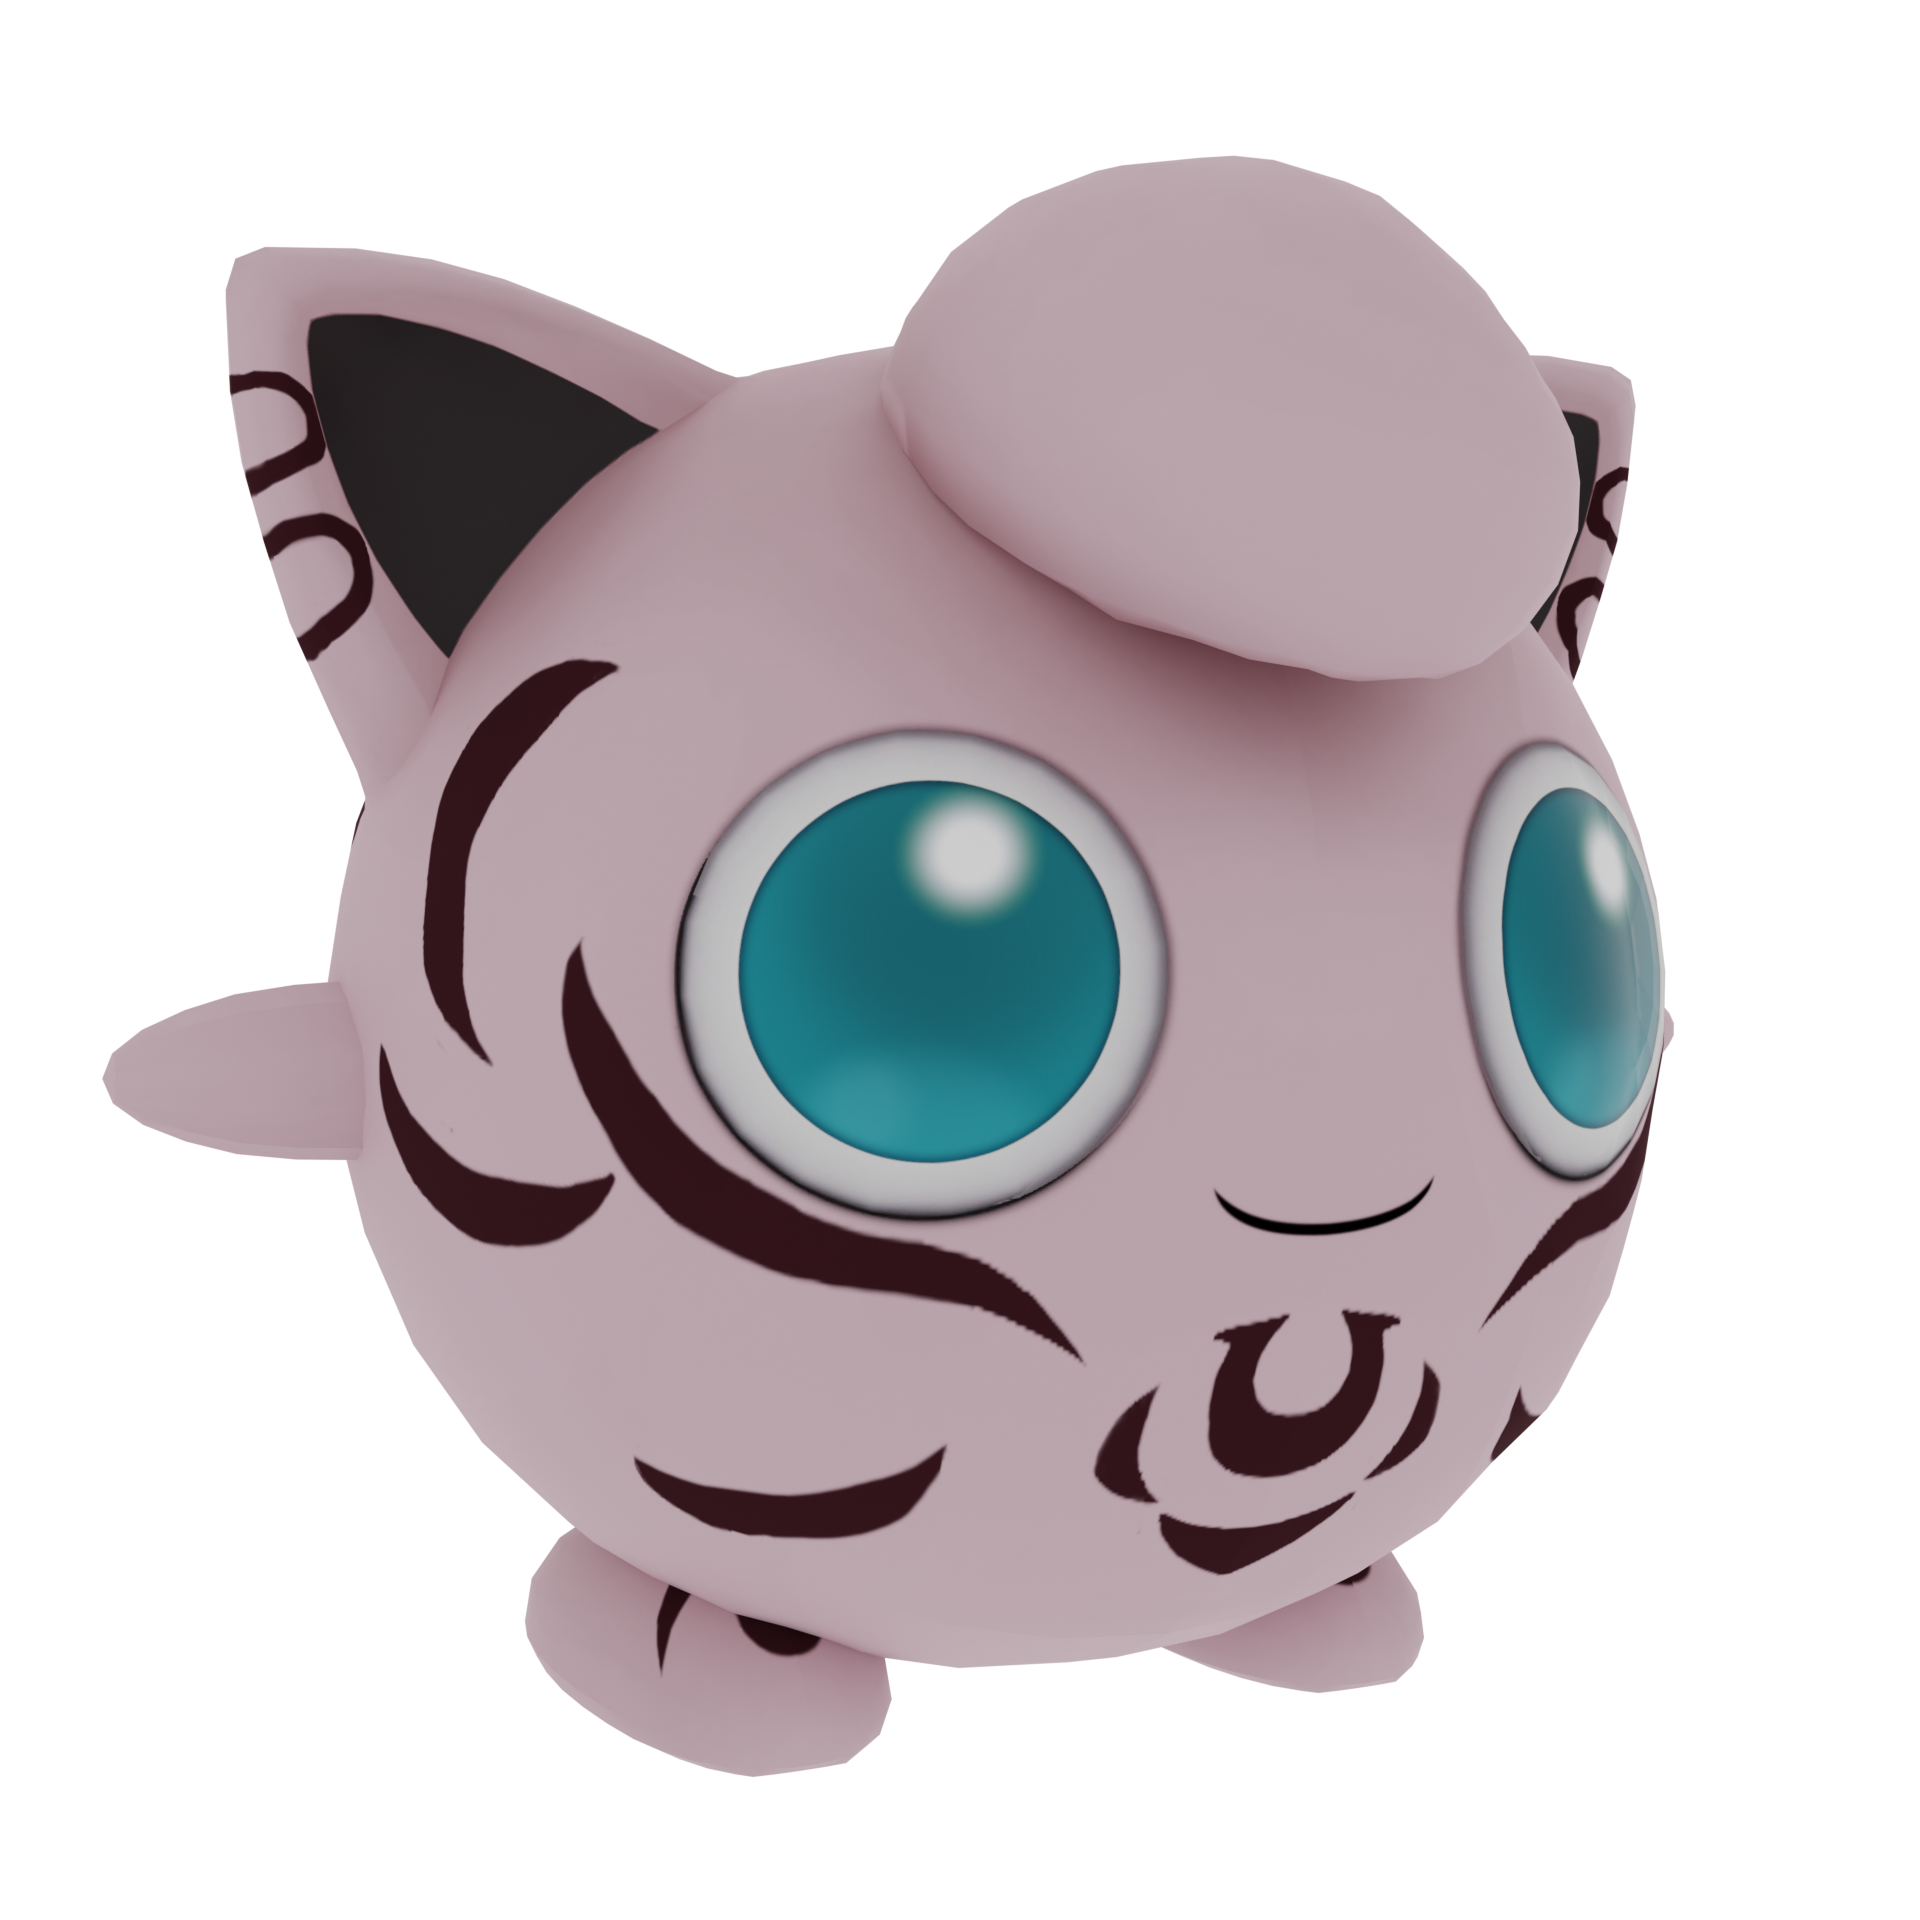 Actually, all the Jigglypuff in the anime is shiny.